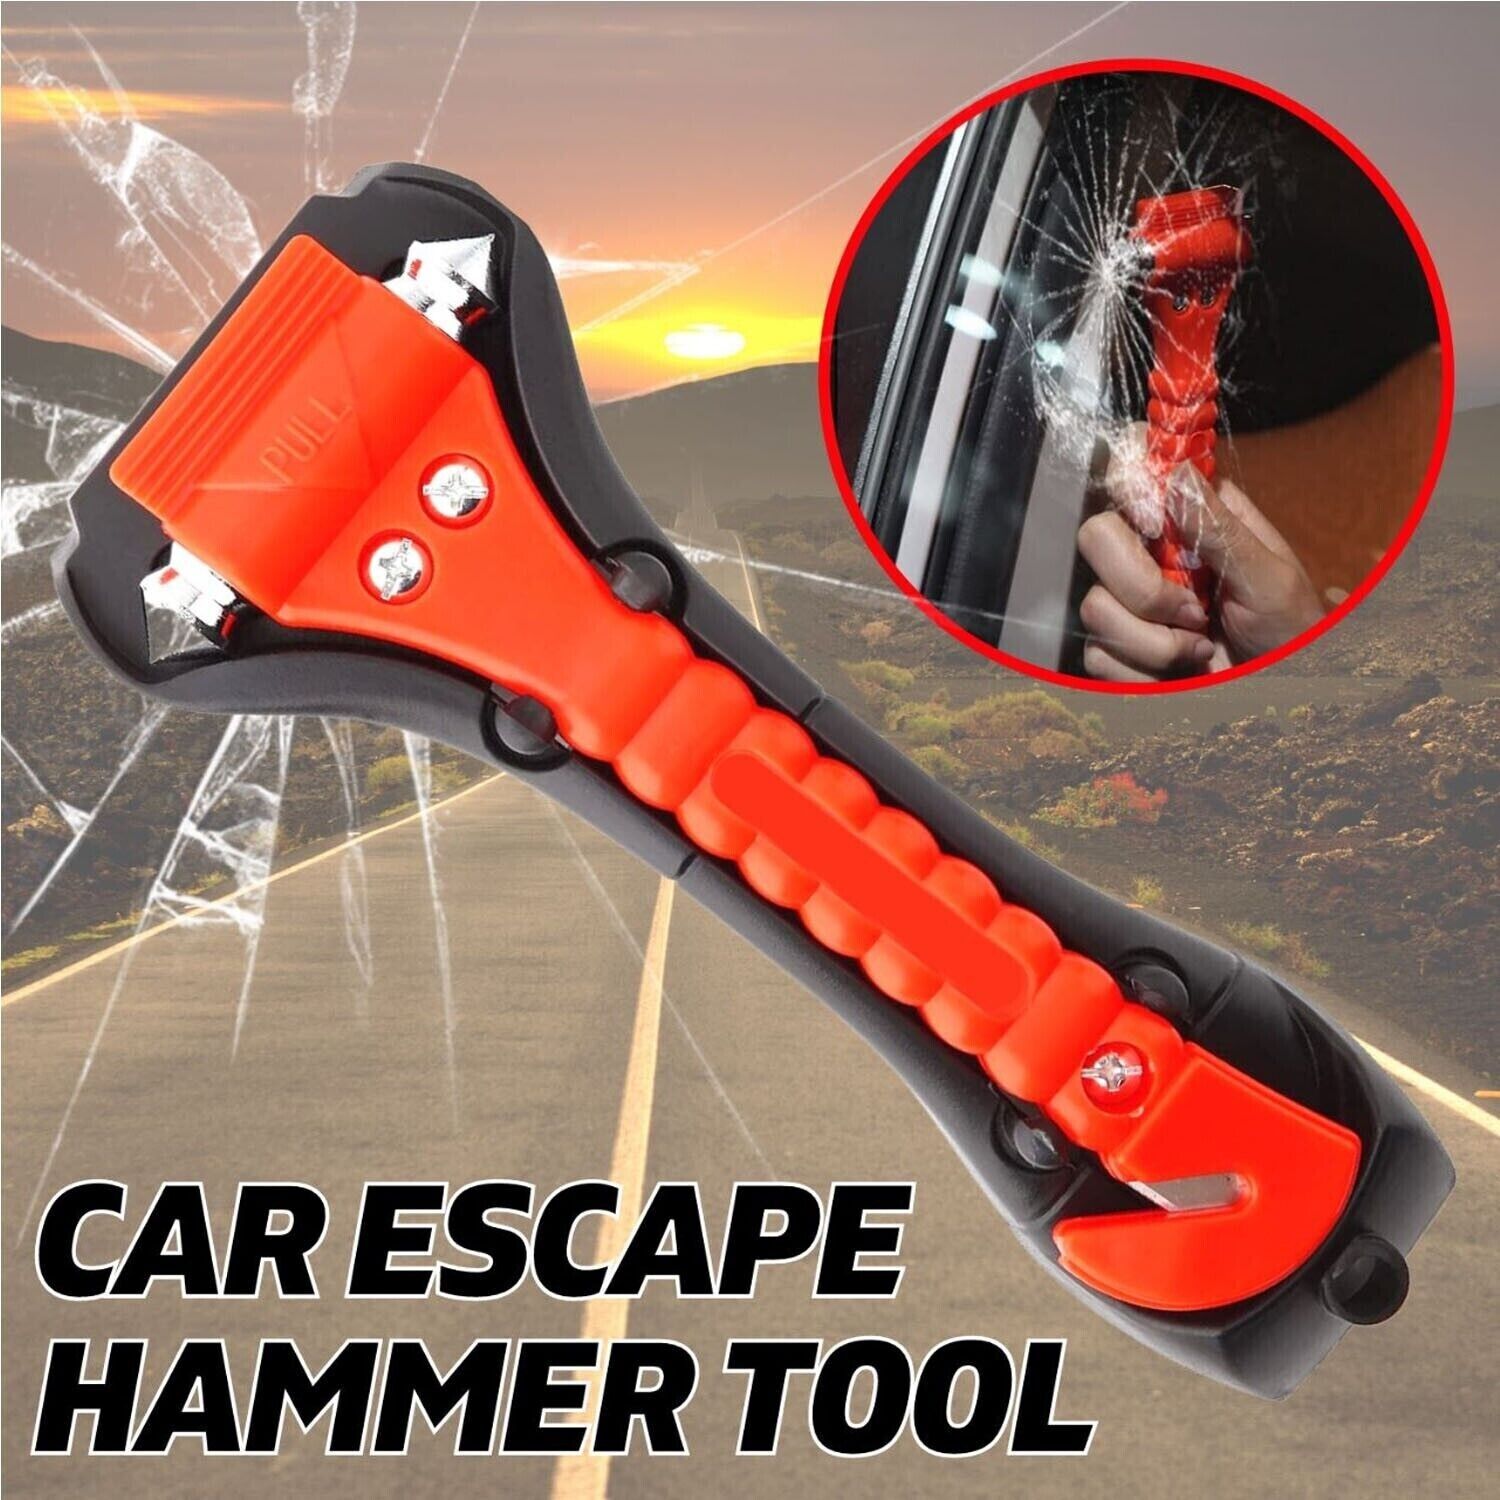 Car Glass Breaker Premium Safety Hammer And Emergency Escape Tool